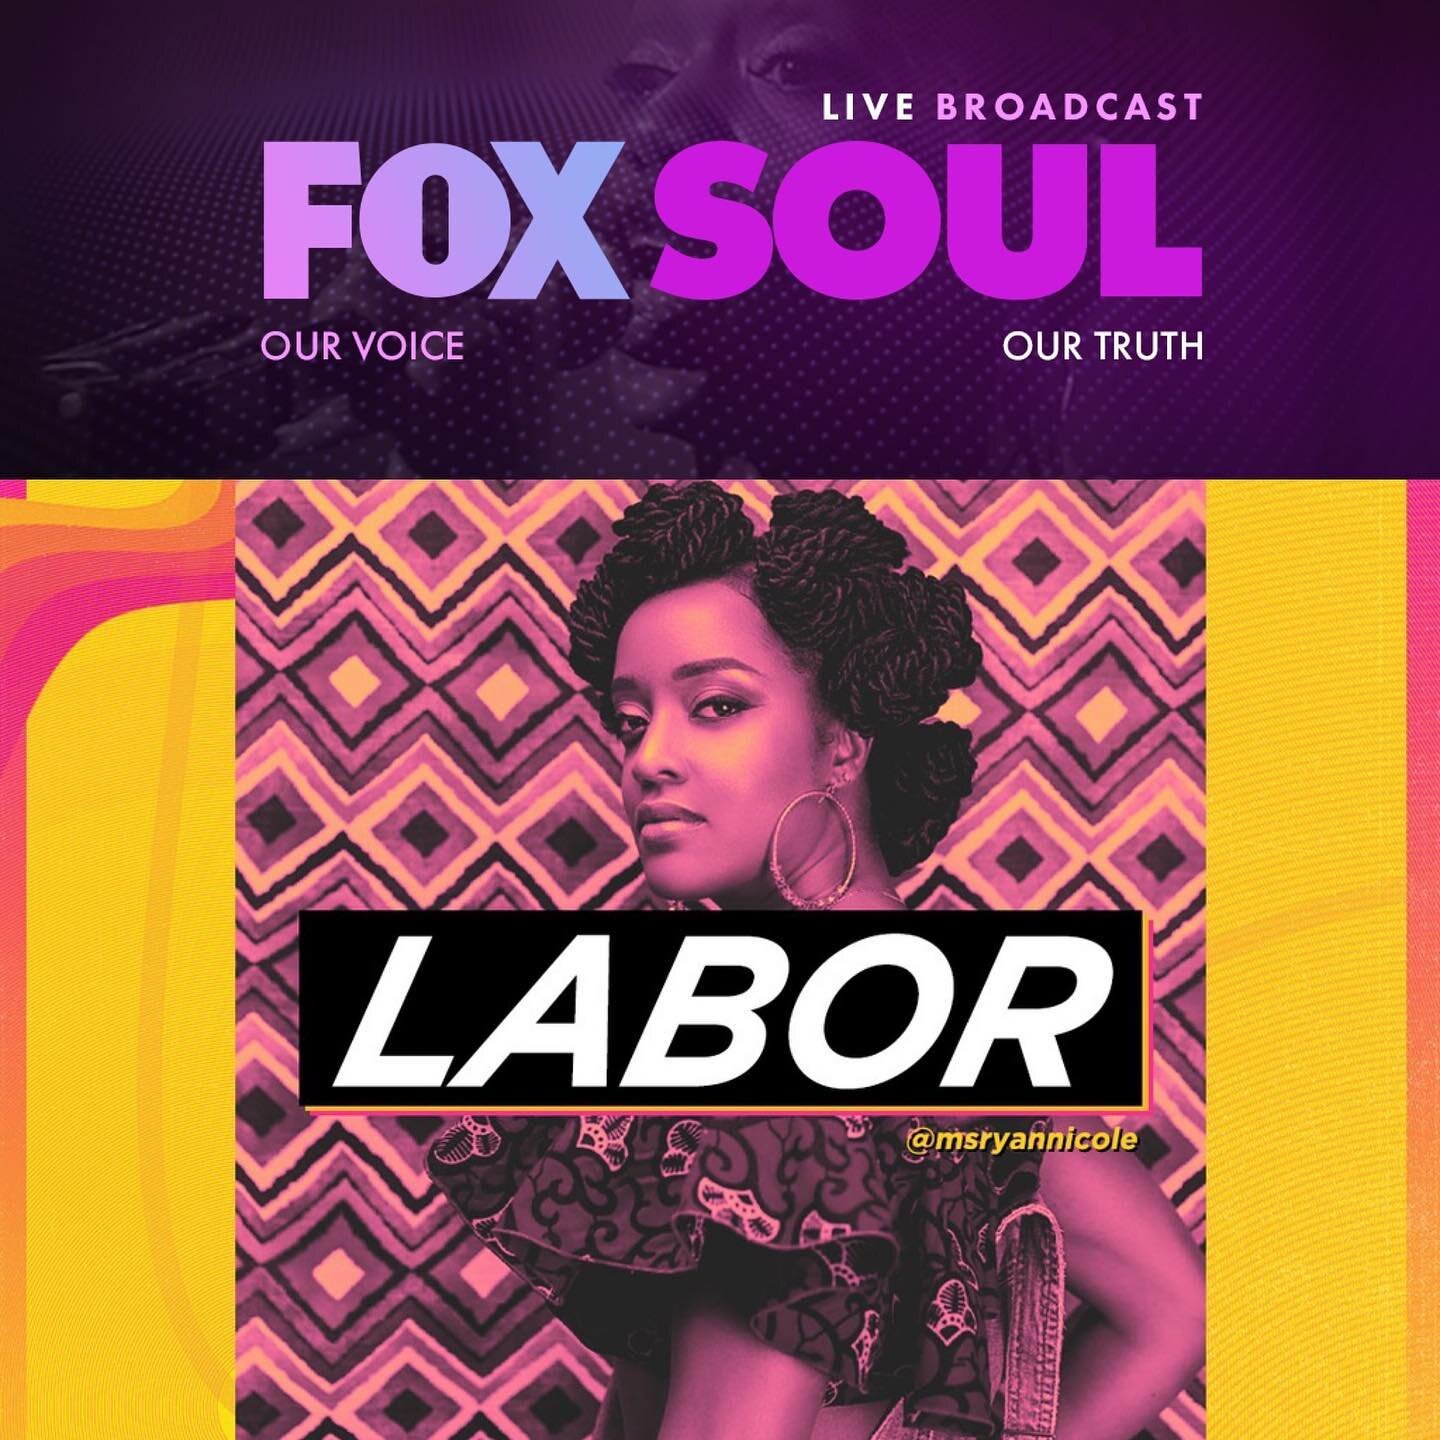 This Wednesday, I&rsquo;ll be featured on FOX-SOUL&rsquo;s &ldquo;Book of Sean&rdquo; show, discussing my short film &ldquo;LABOR&rdquo; w/director Niema Jordan. 

&ldquo;LABOR&rdquo; is a poetic short film demanding acknowledgement &amp; honor for a